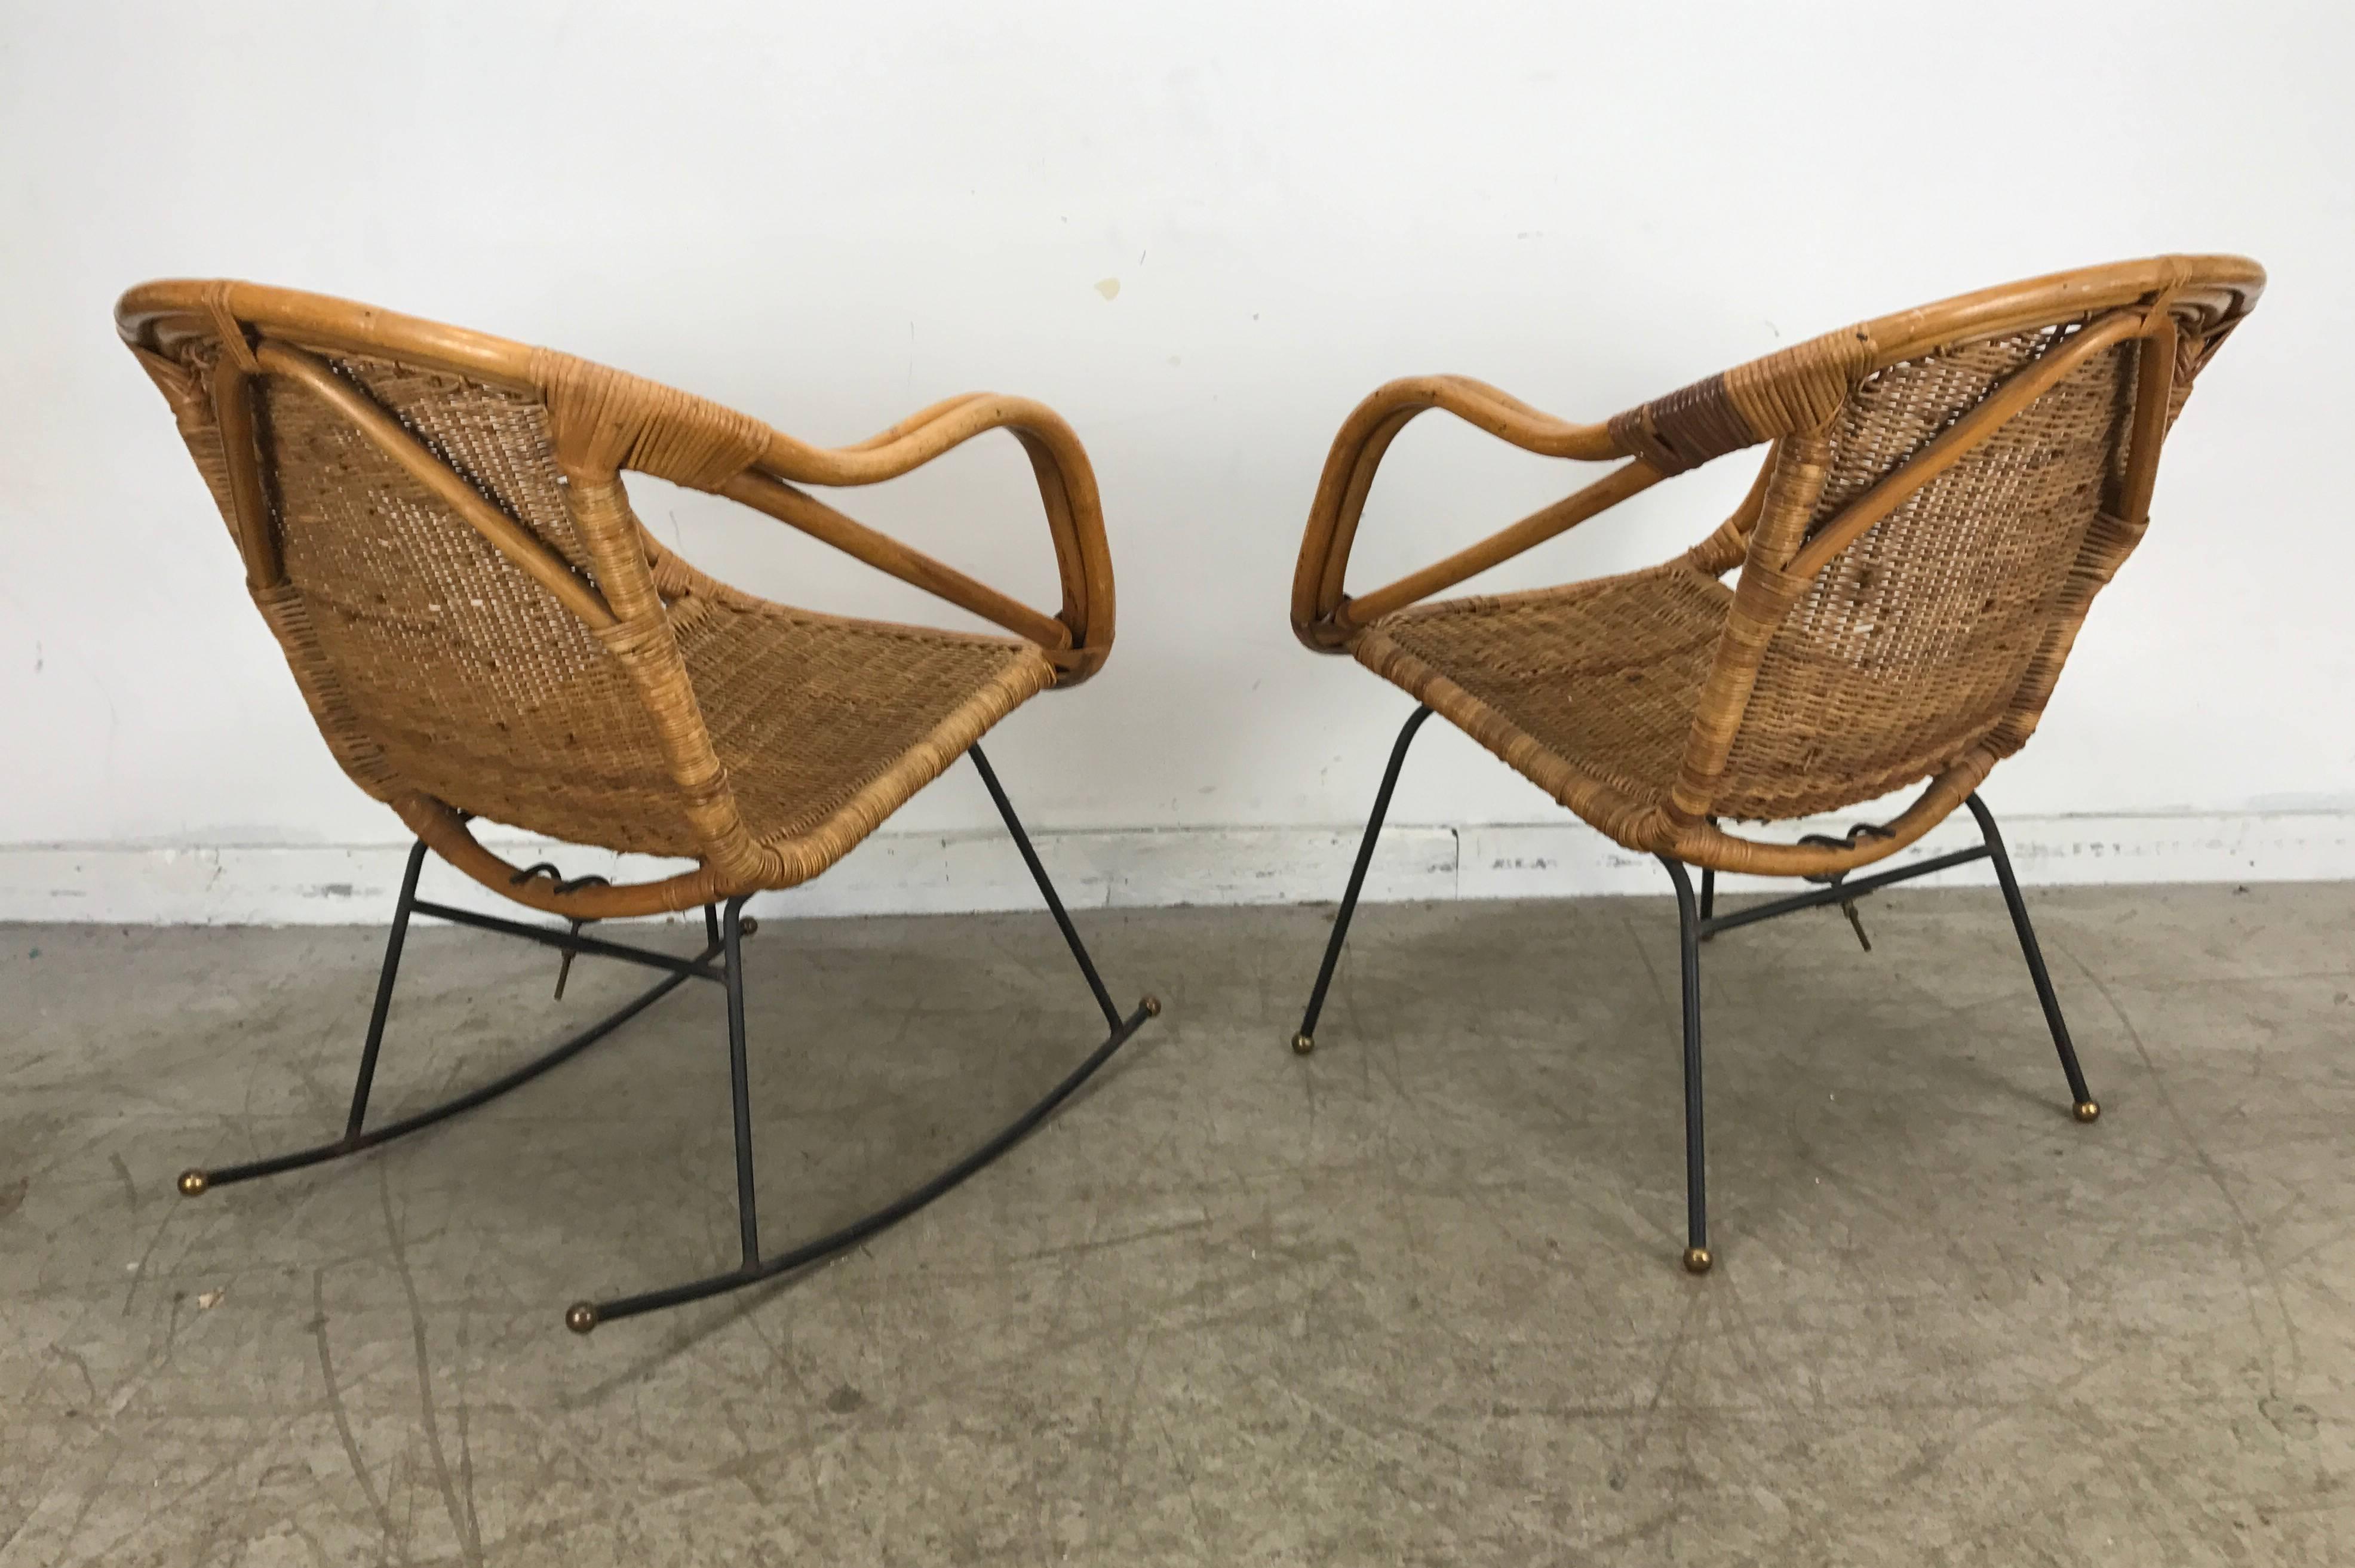 American Pair of Mid-Century Modern Wicker and Iron Lounge Chairs, Garden or Patio